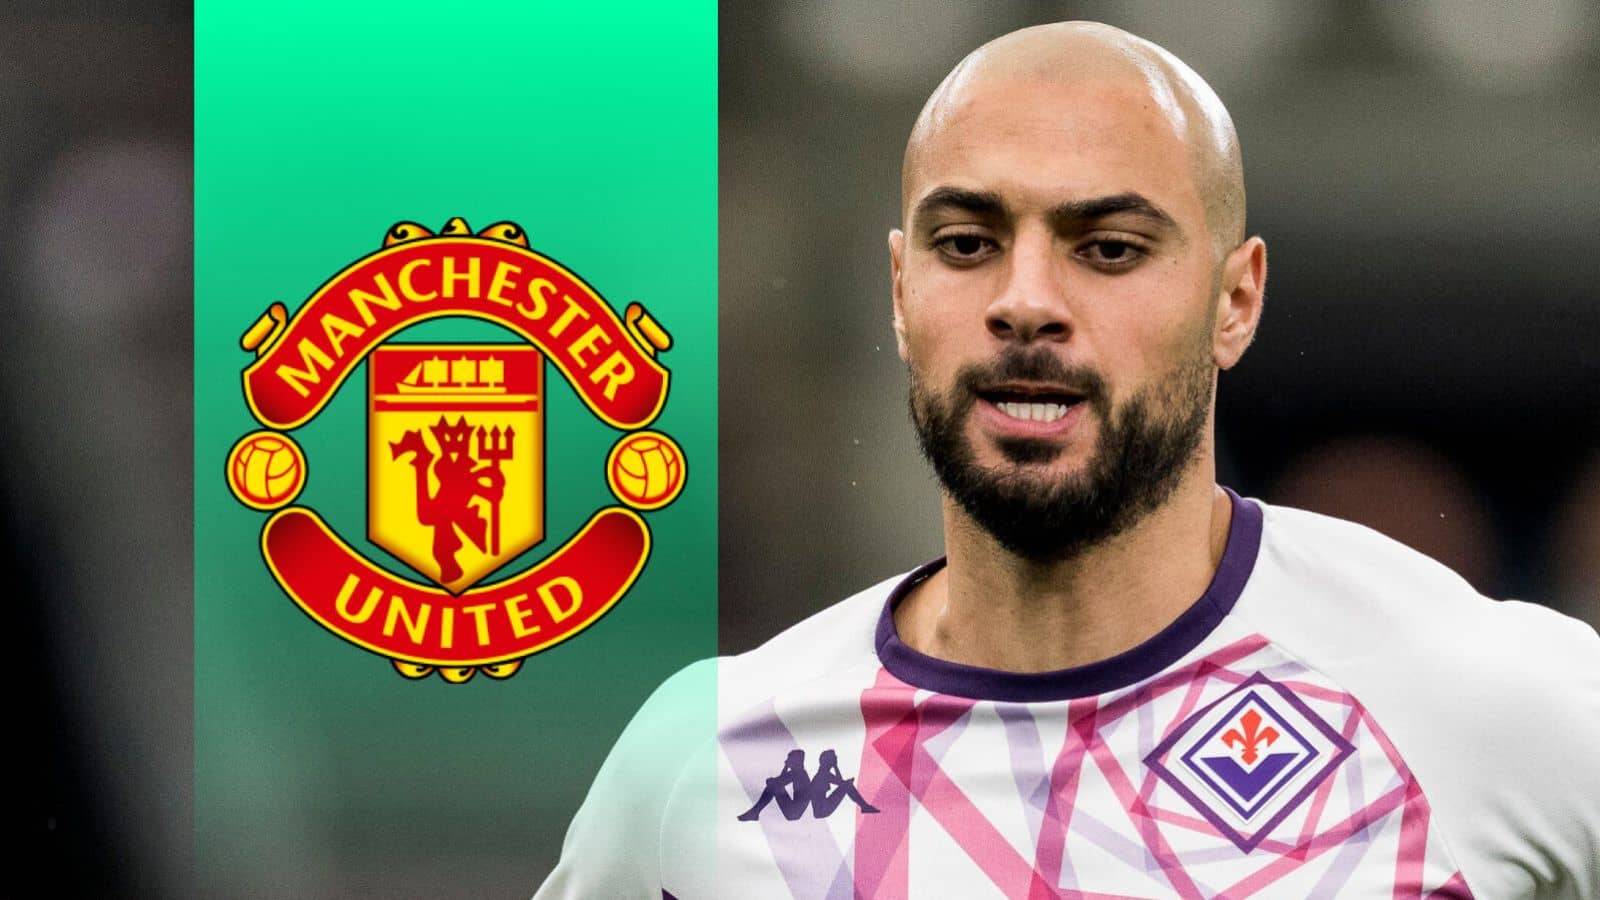 A New Update On Sofyan Amrabat To Manchester United